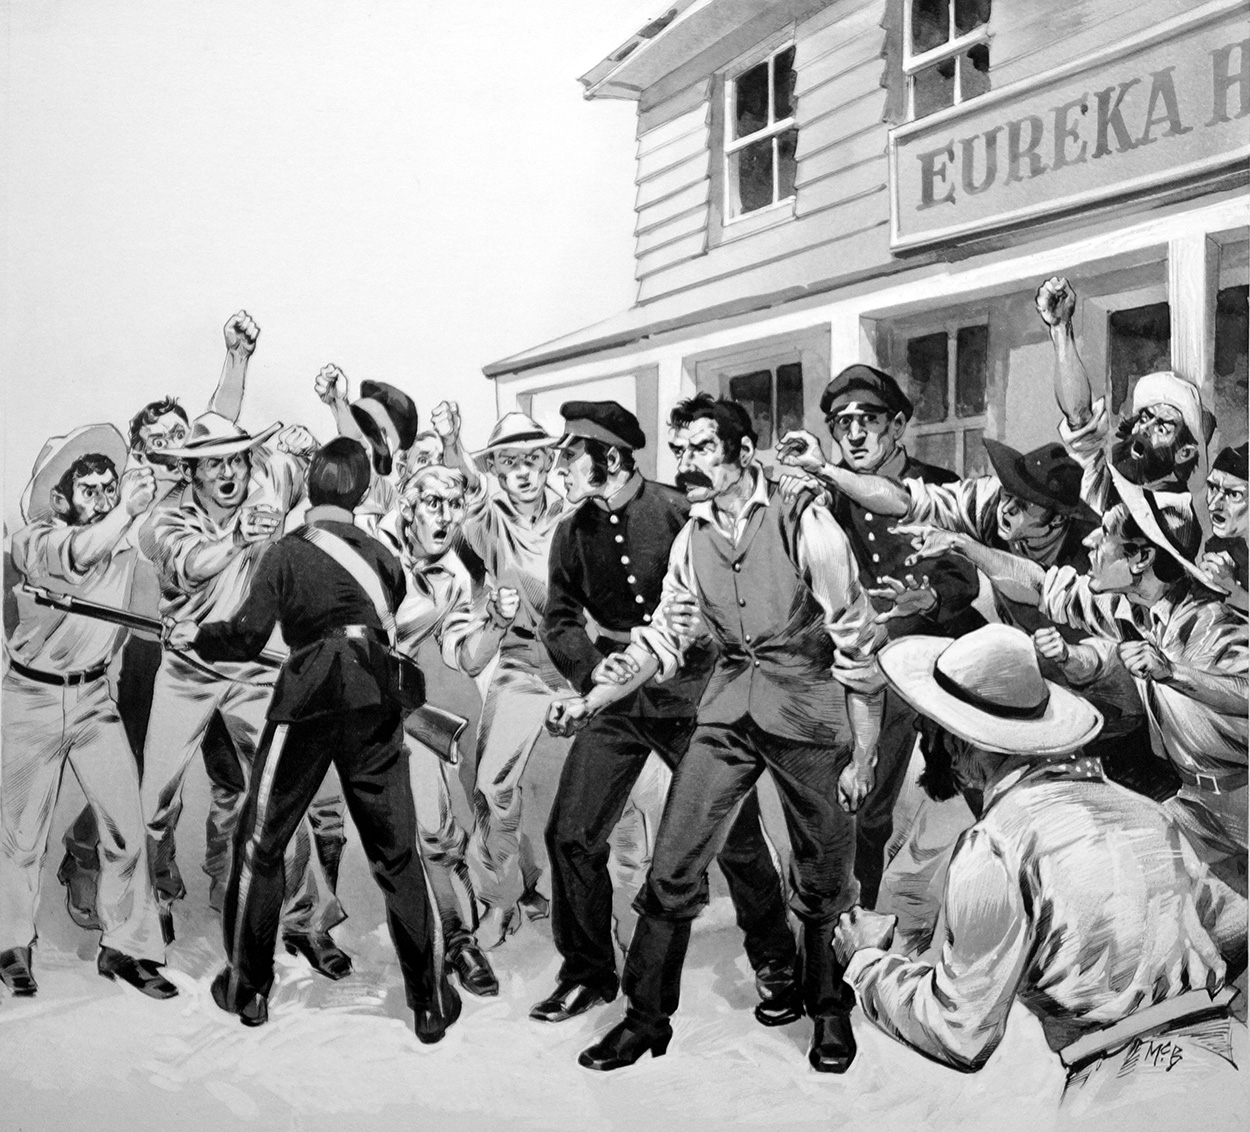 The Defence of the Eureka Stockade (Original) (Signed) art by Angus McBride at The Illustration Art Gallery